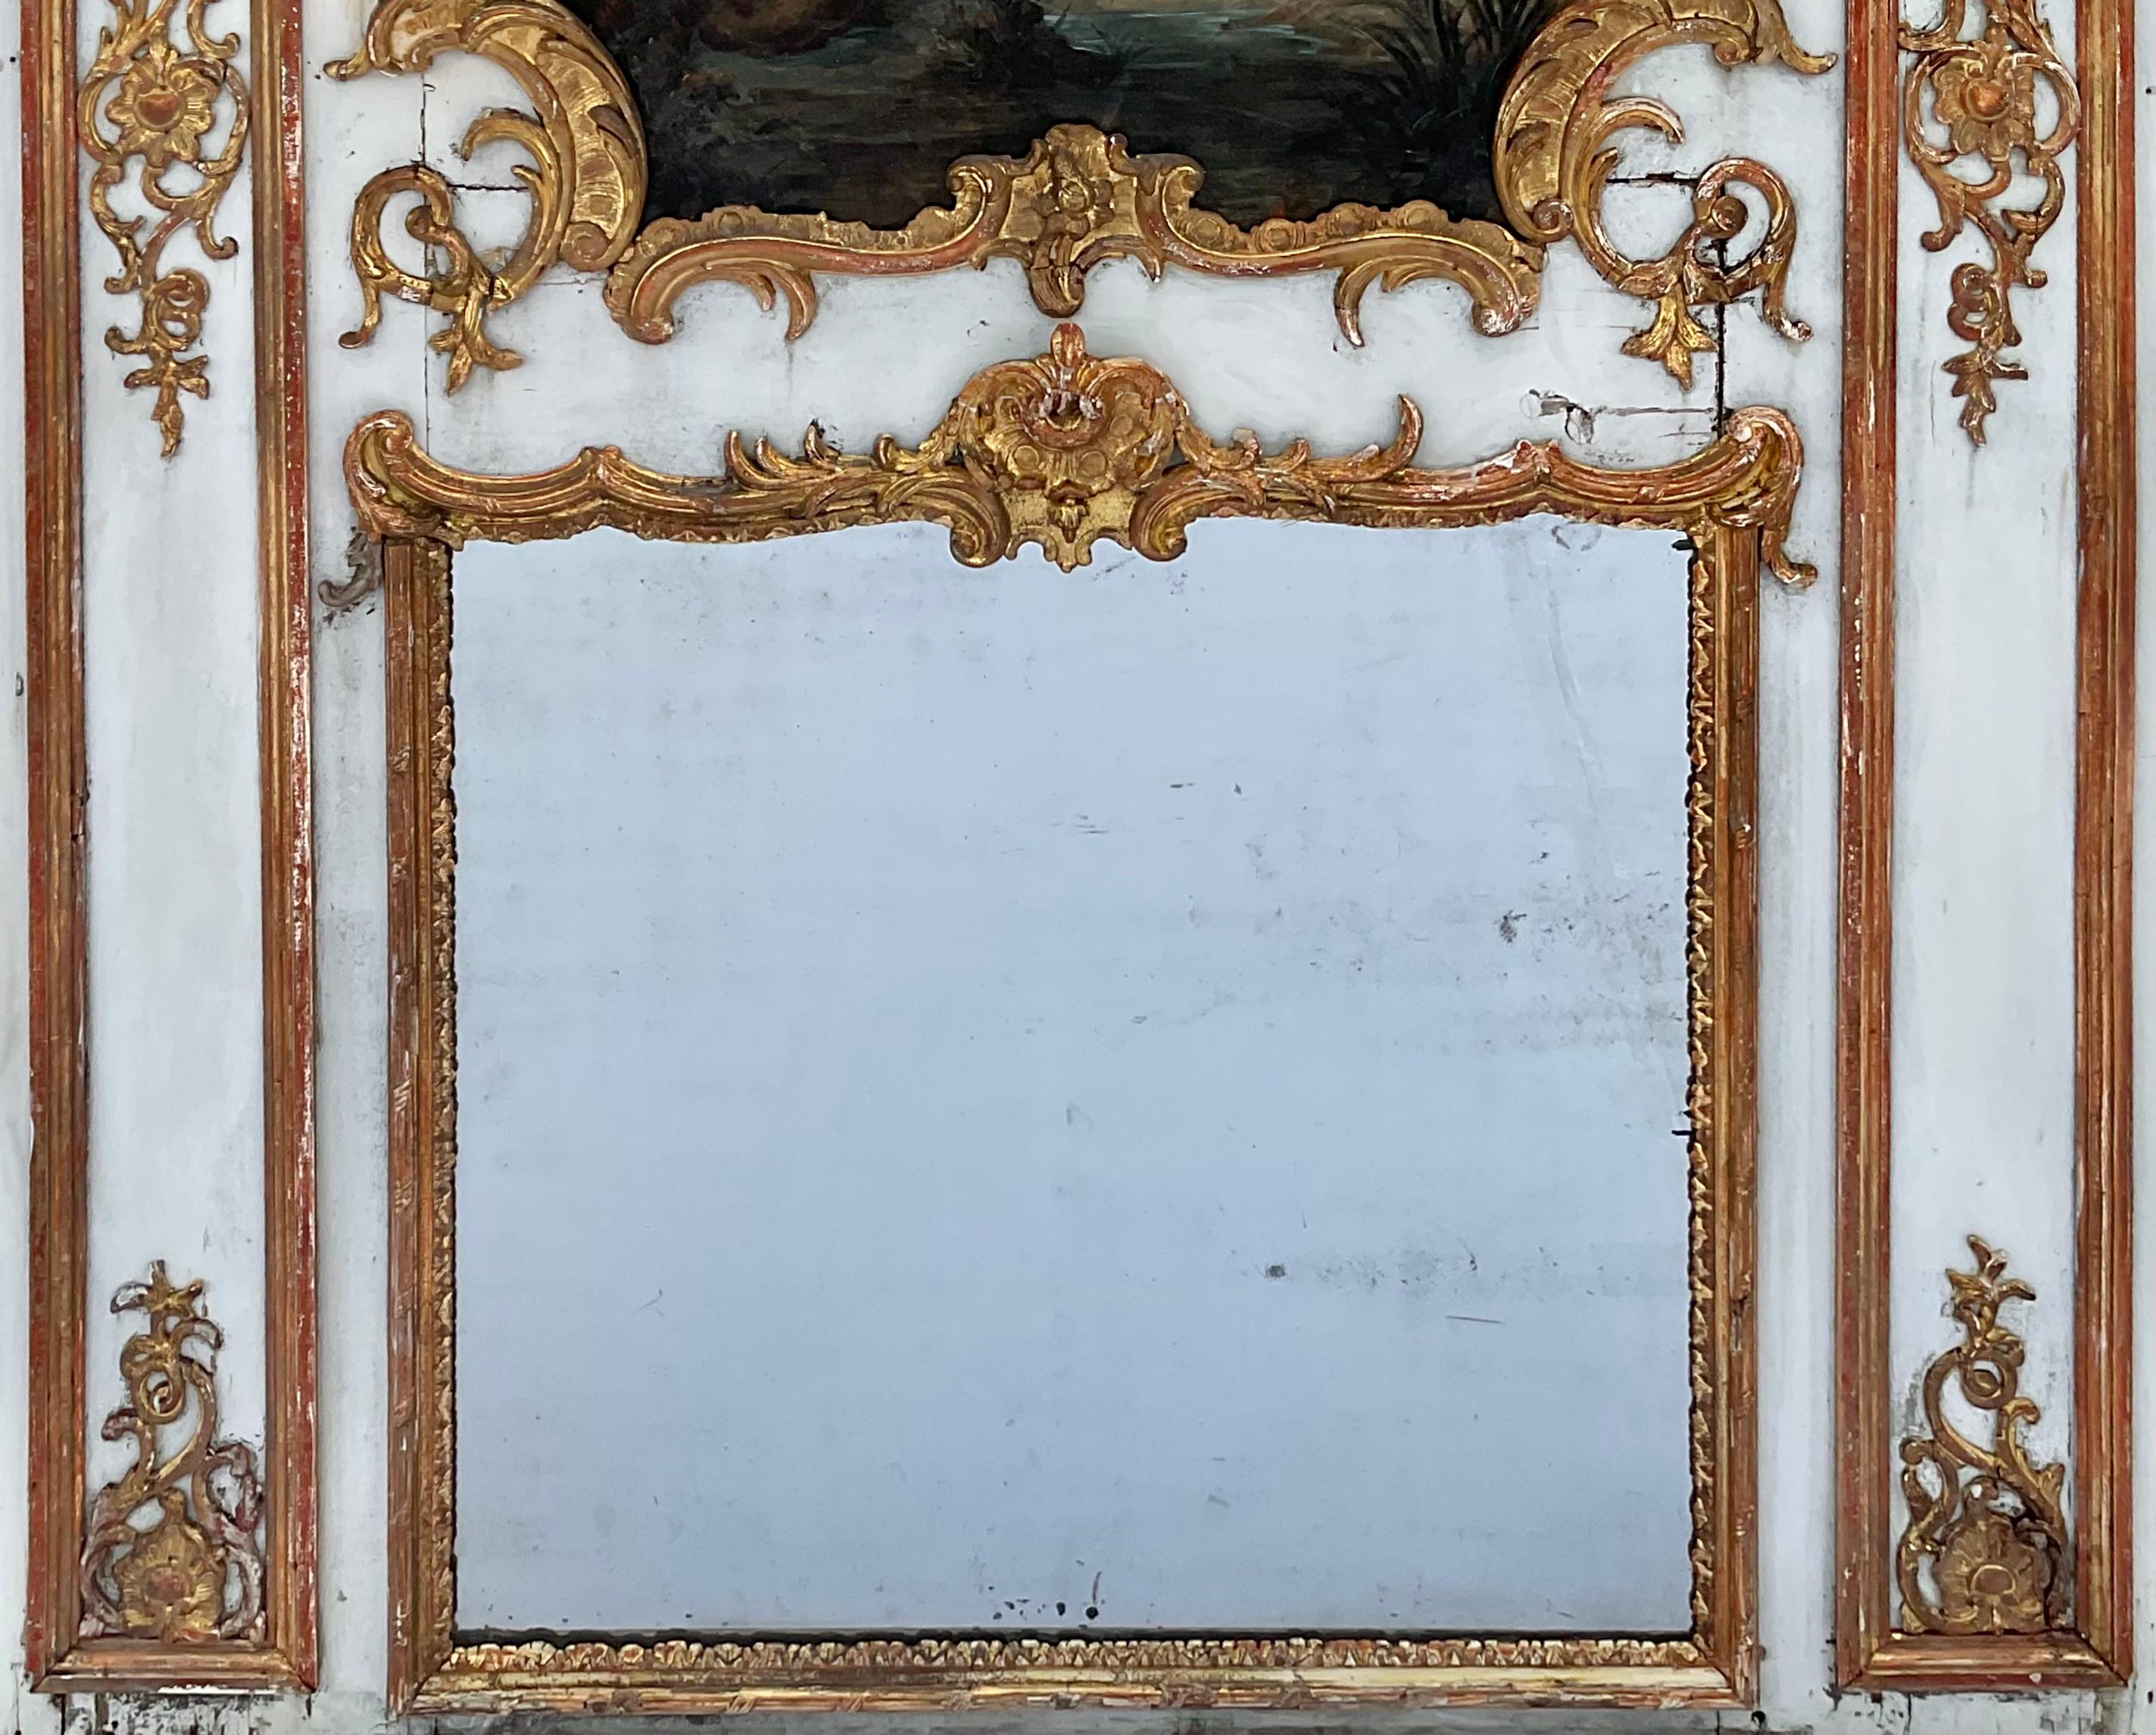 Monumental 18th Century French Giltwood Trumeau Mirror with Original Painting In Good Condition For Sale In Bradenton, FL